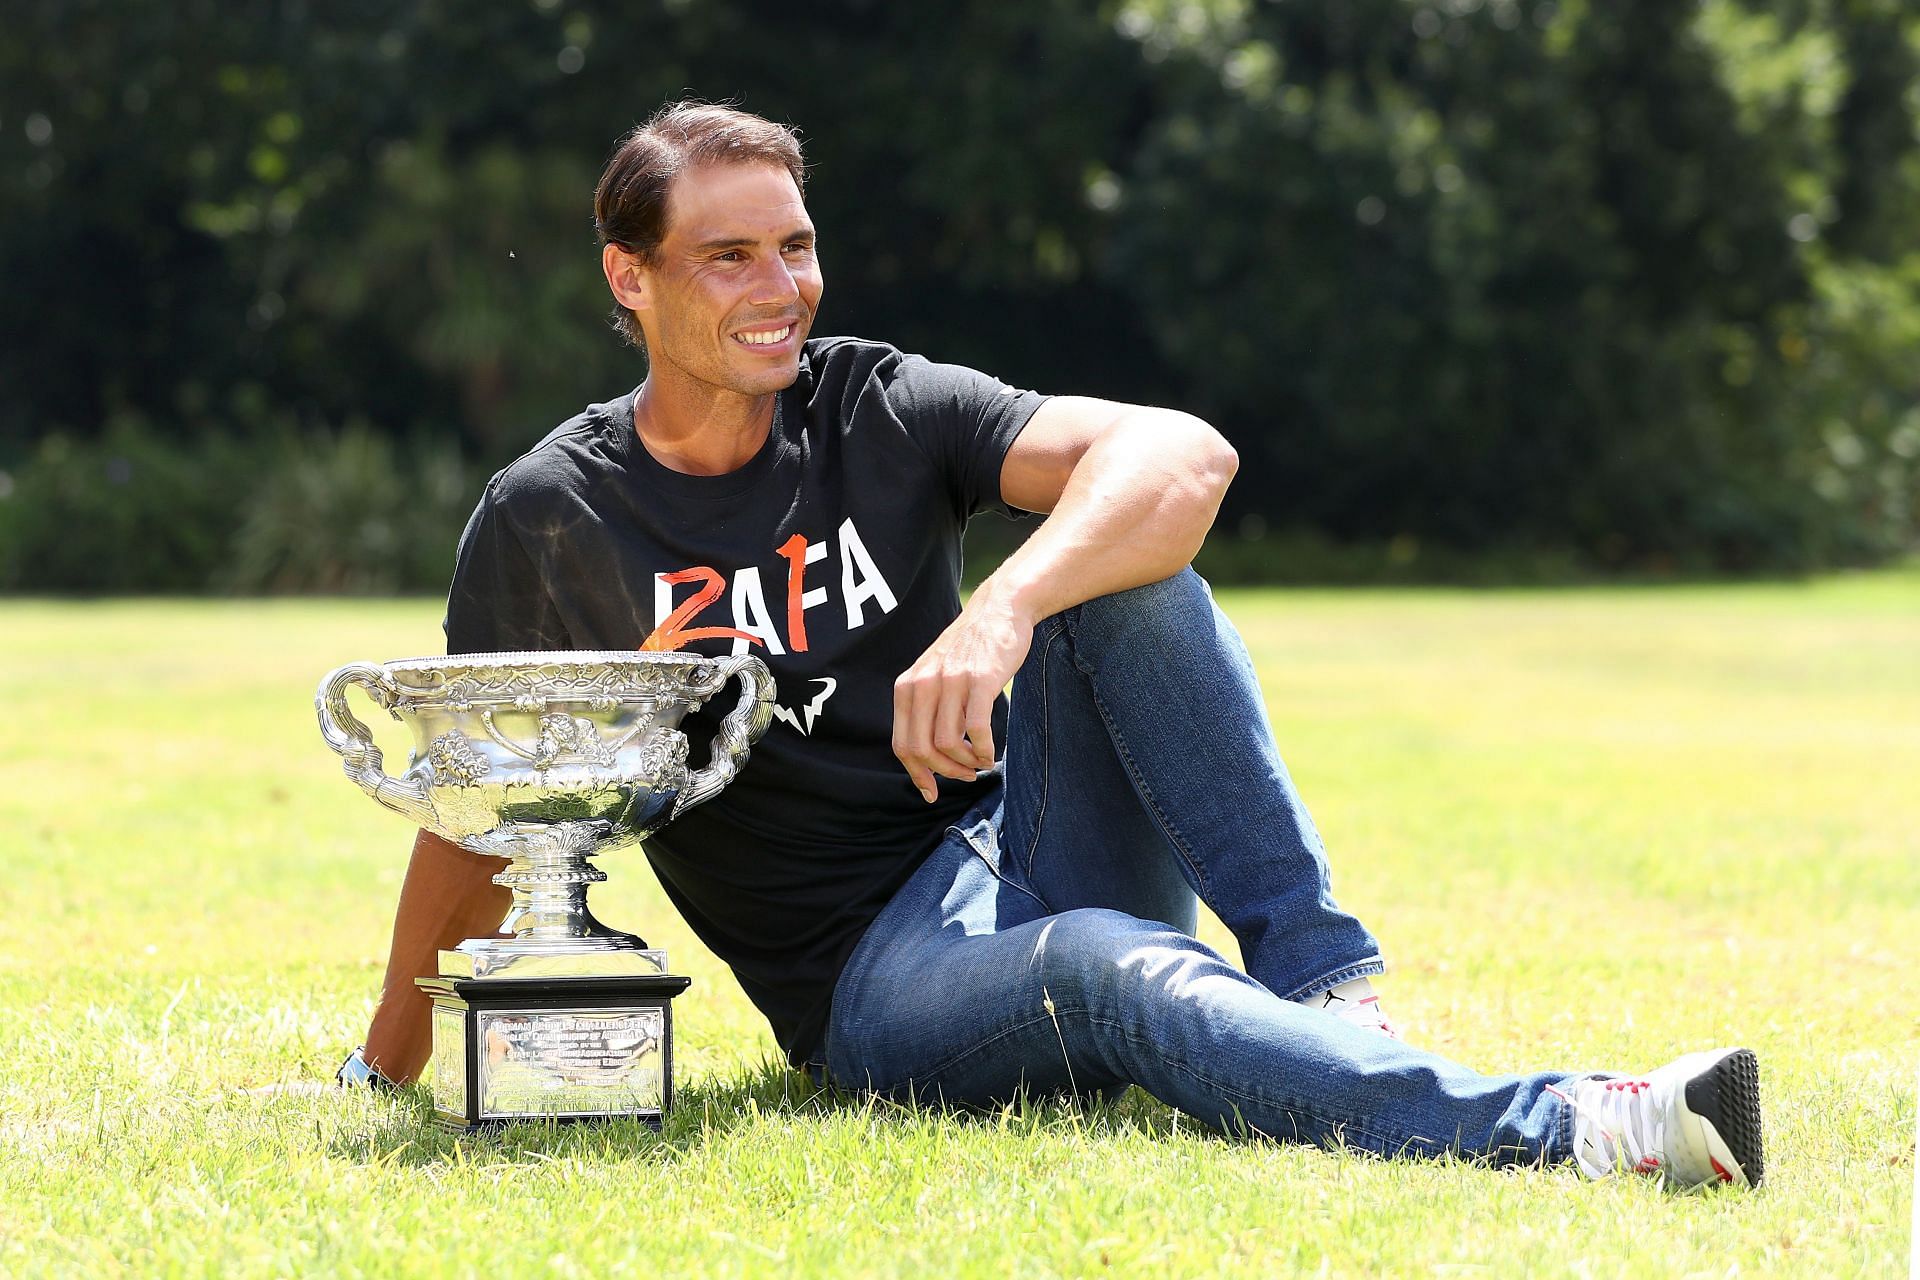 The Spanish bull poses with the 2022 Australian Open trophy